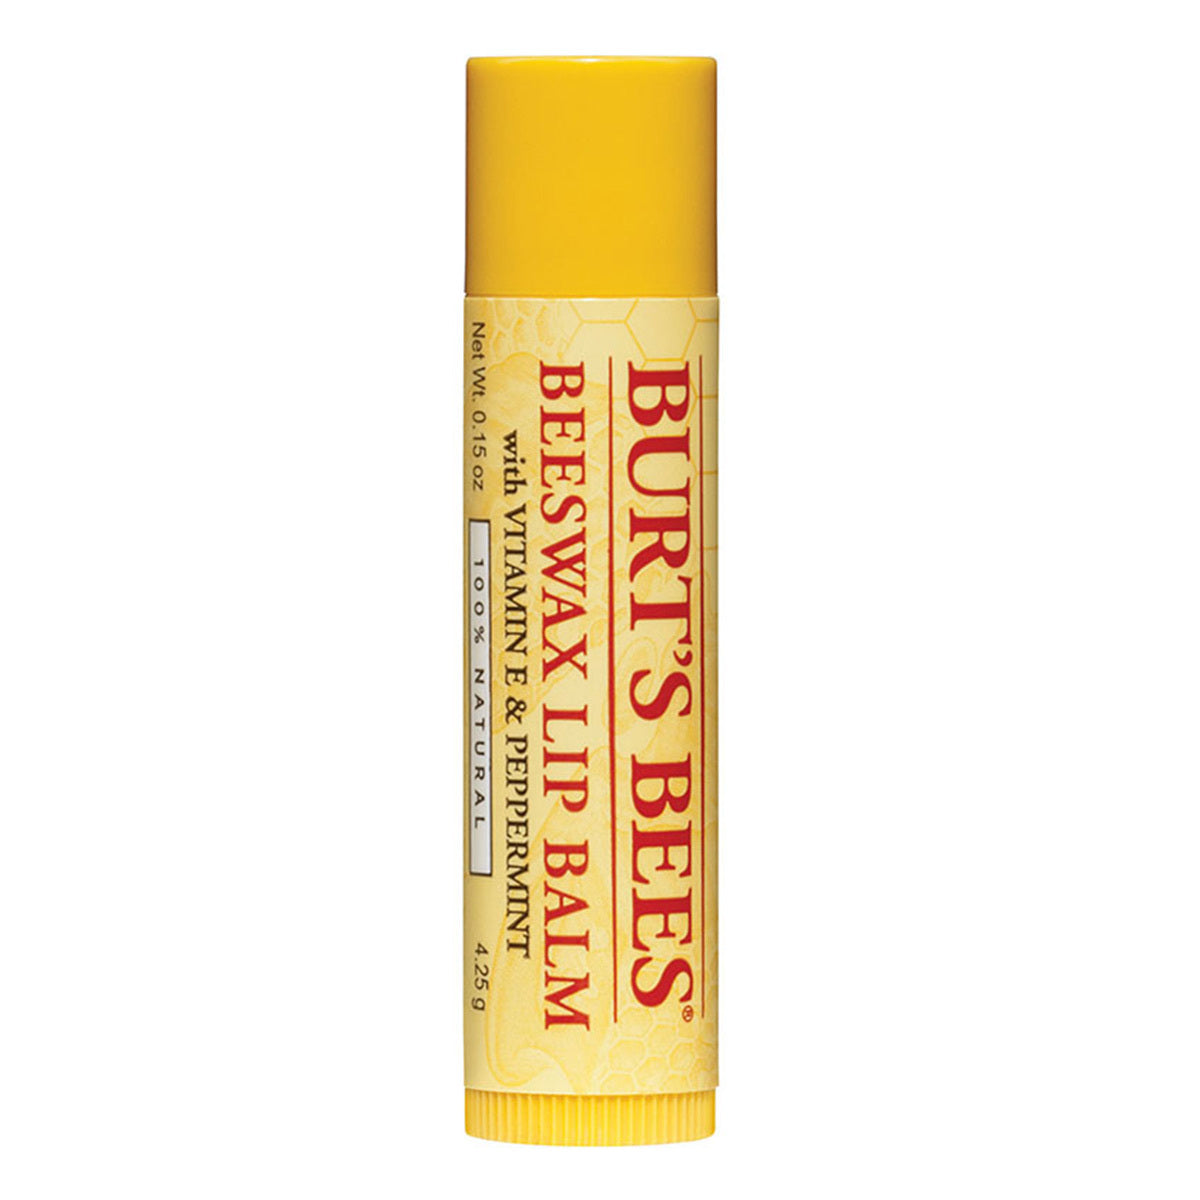 Primary image of Beeswax Lip Balm